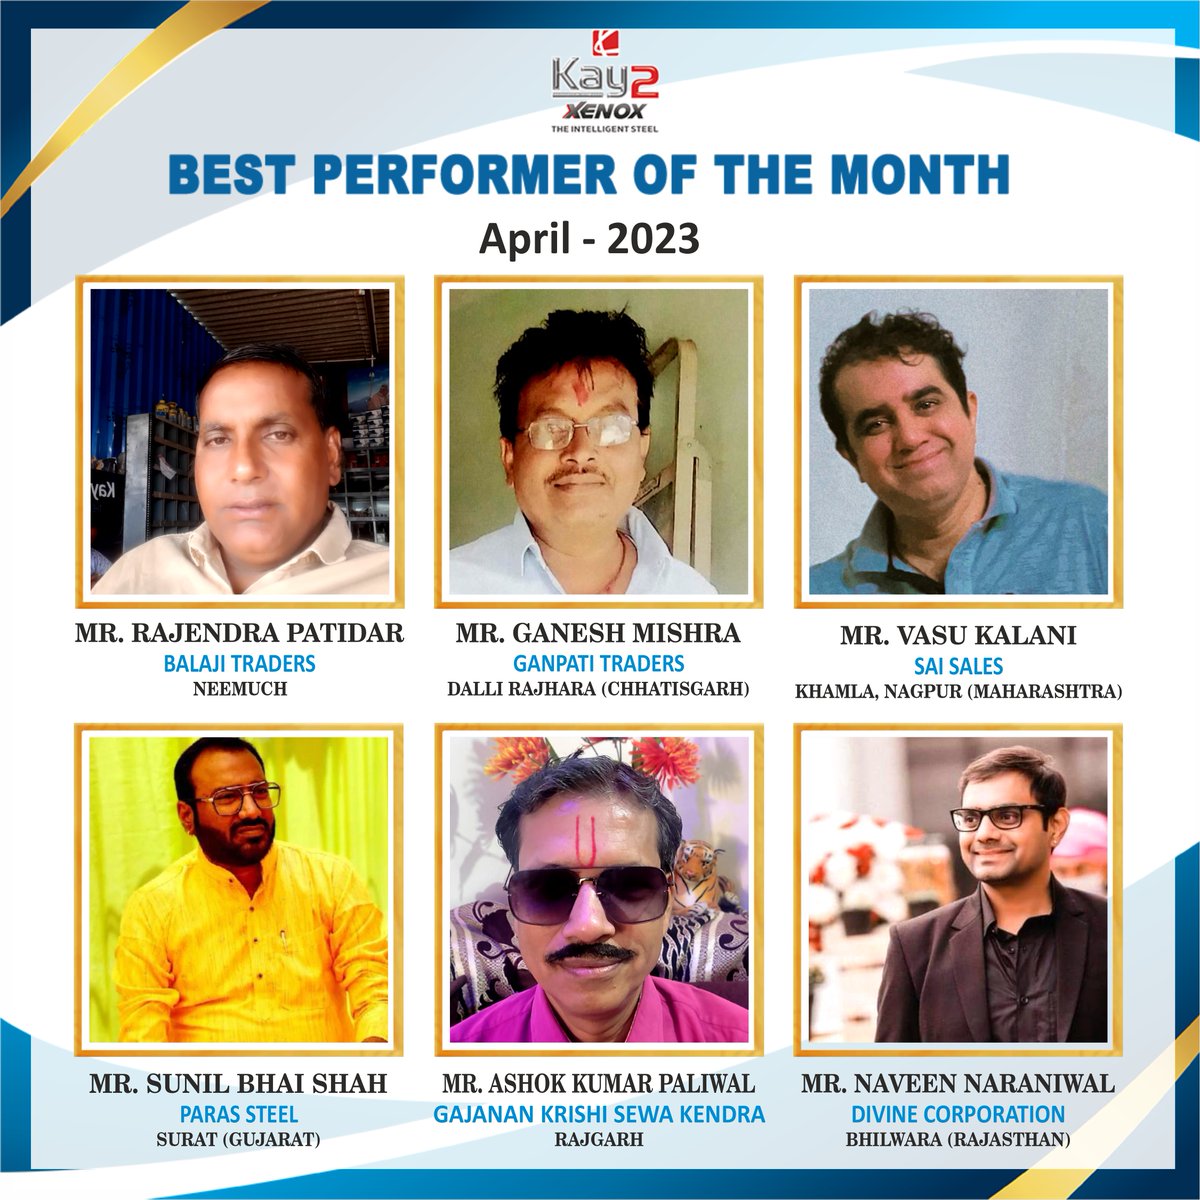 Strong motivations lead to extraordinary achievements. Kay2 Xenox congratulates the top performers for April 2023 who have set the bar high & inspired us all to reach for greater success. We're proud to have you on our team.

#DealerOfTheMonth #BestPerformer #Kay2Xenox  #TMTbars